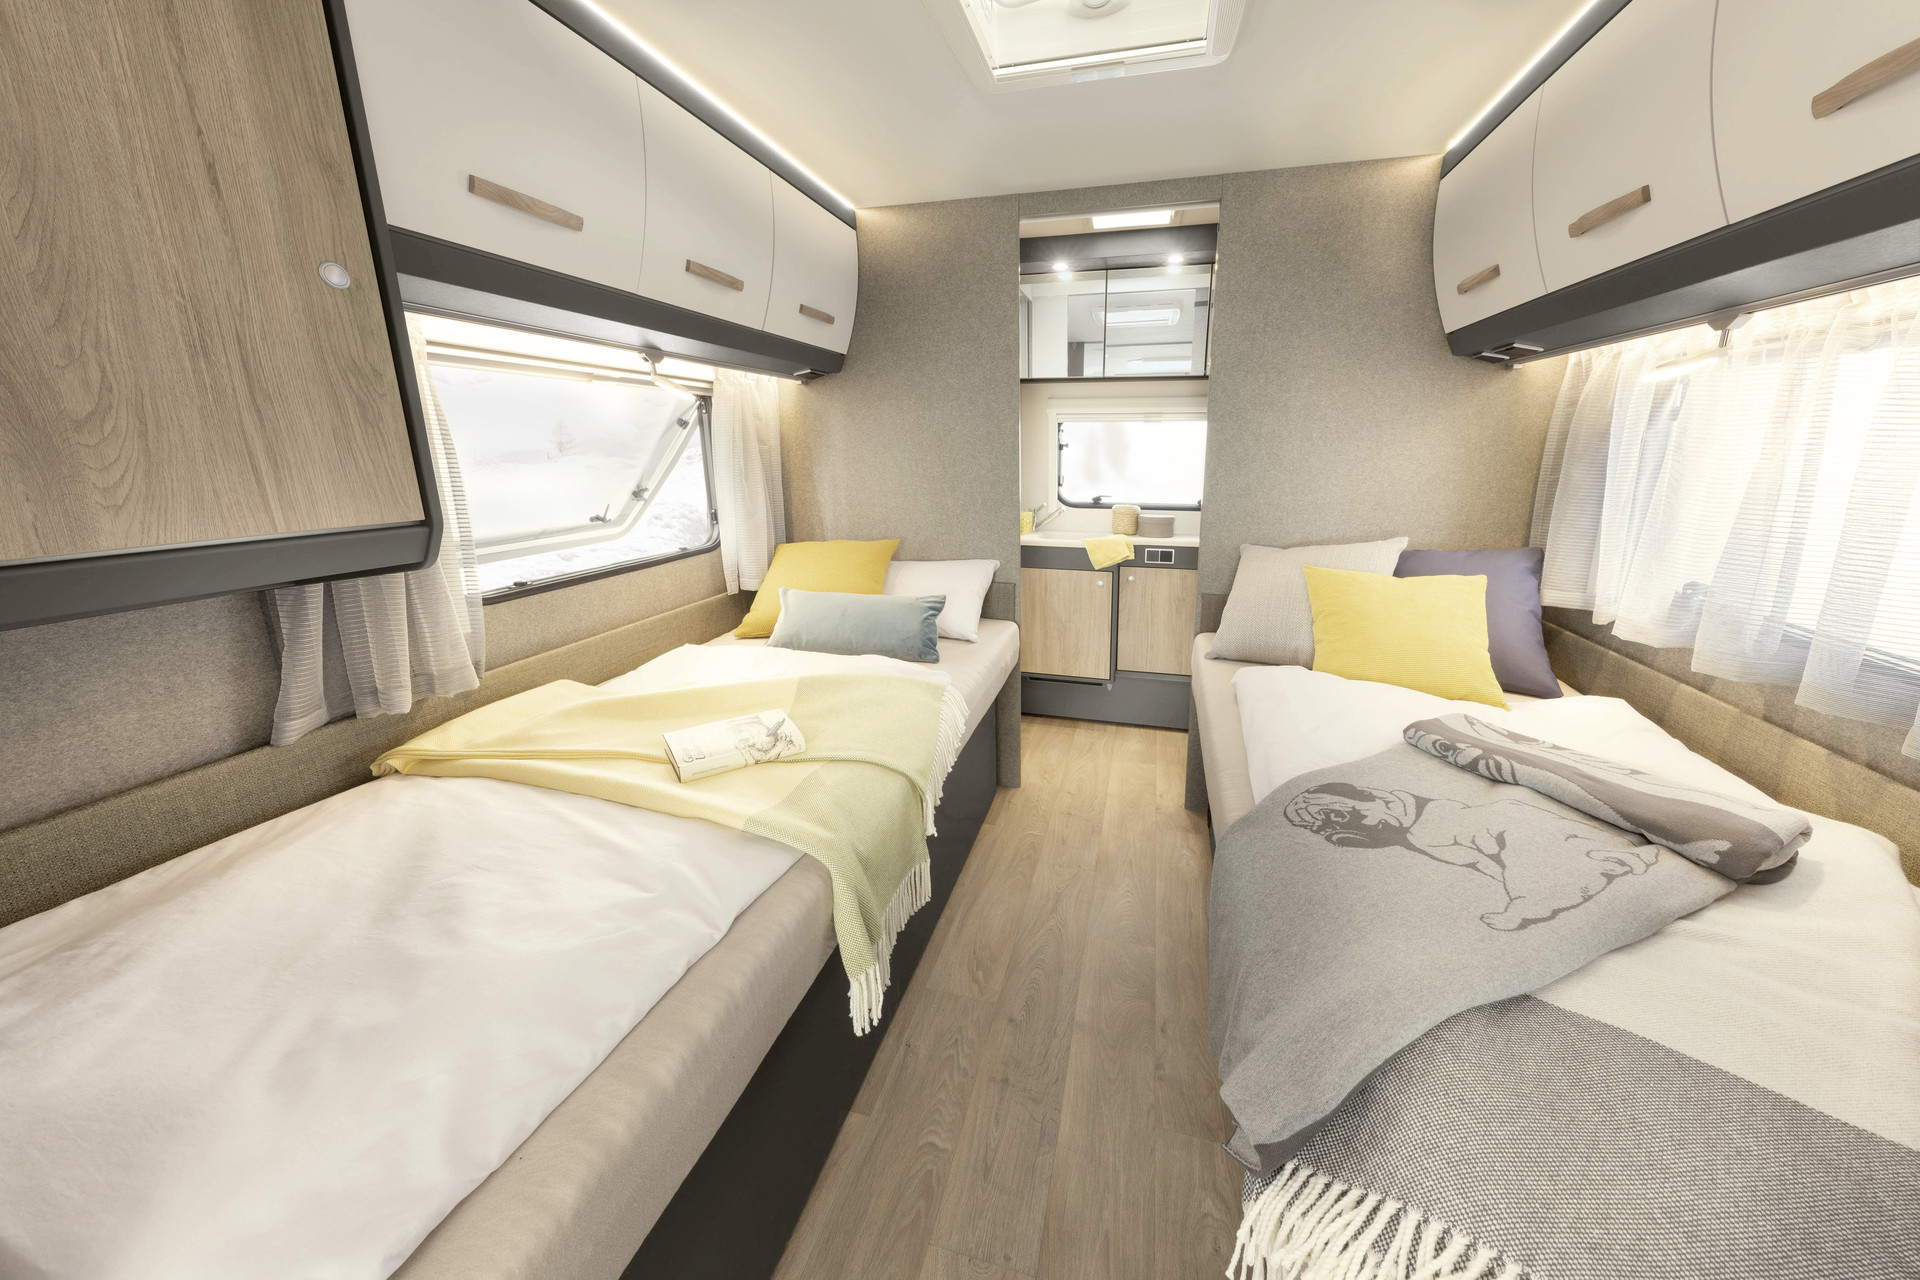 The comfortable single beds promise a restful night's sleep. The adjoining generous bathroom stretches across the full width of the vehicle • 670 BET | Tarragona